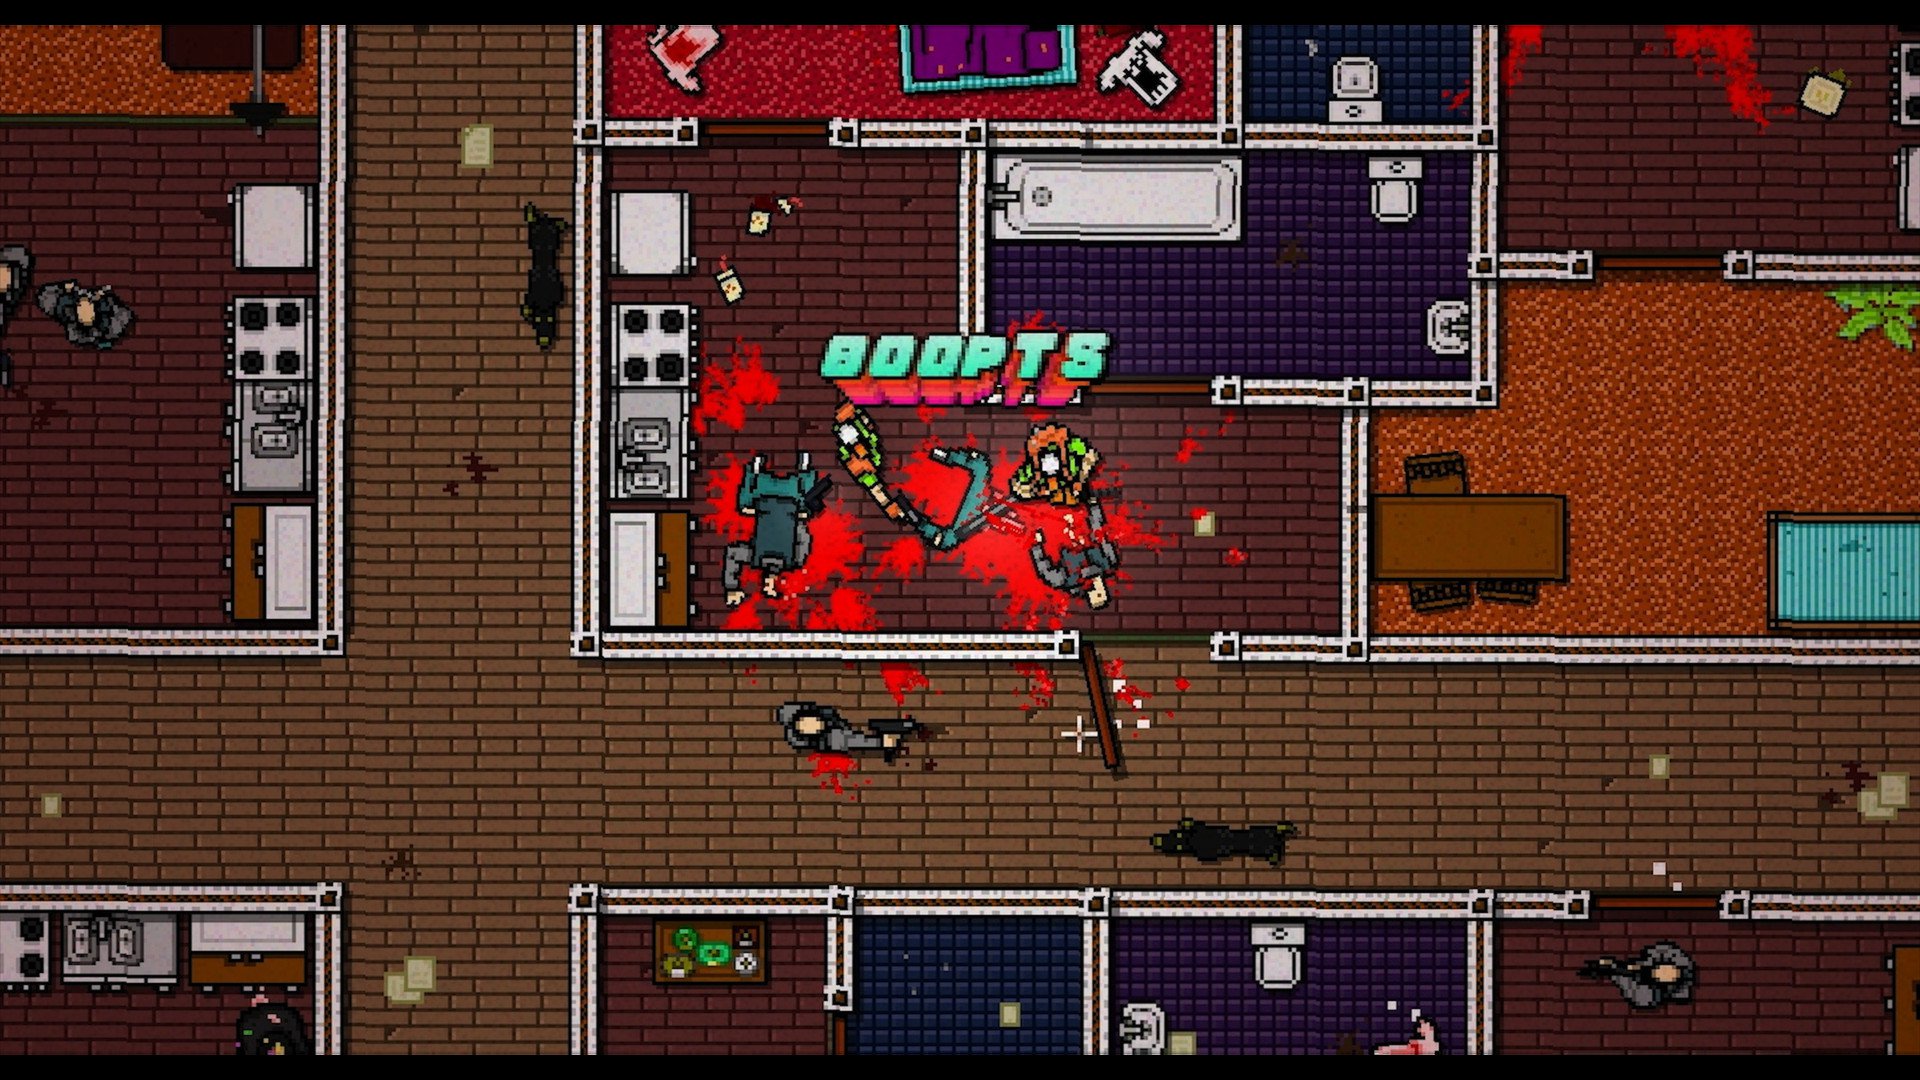 Hotline Miami 2 Wrong Number 4